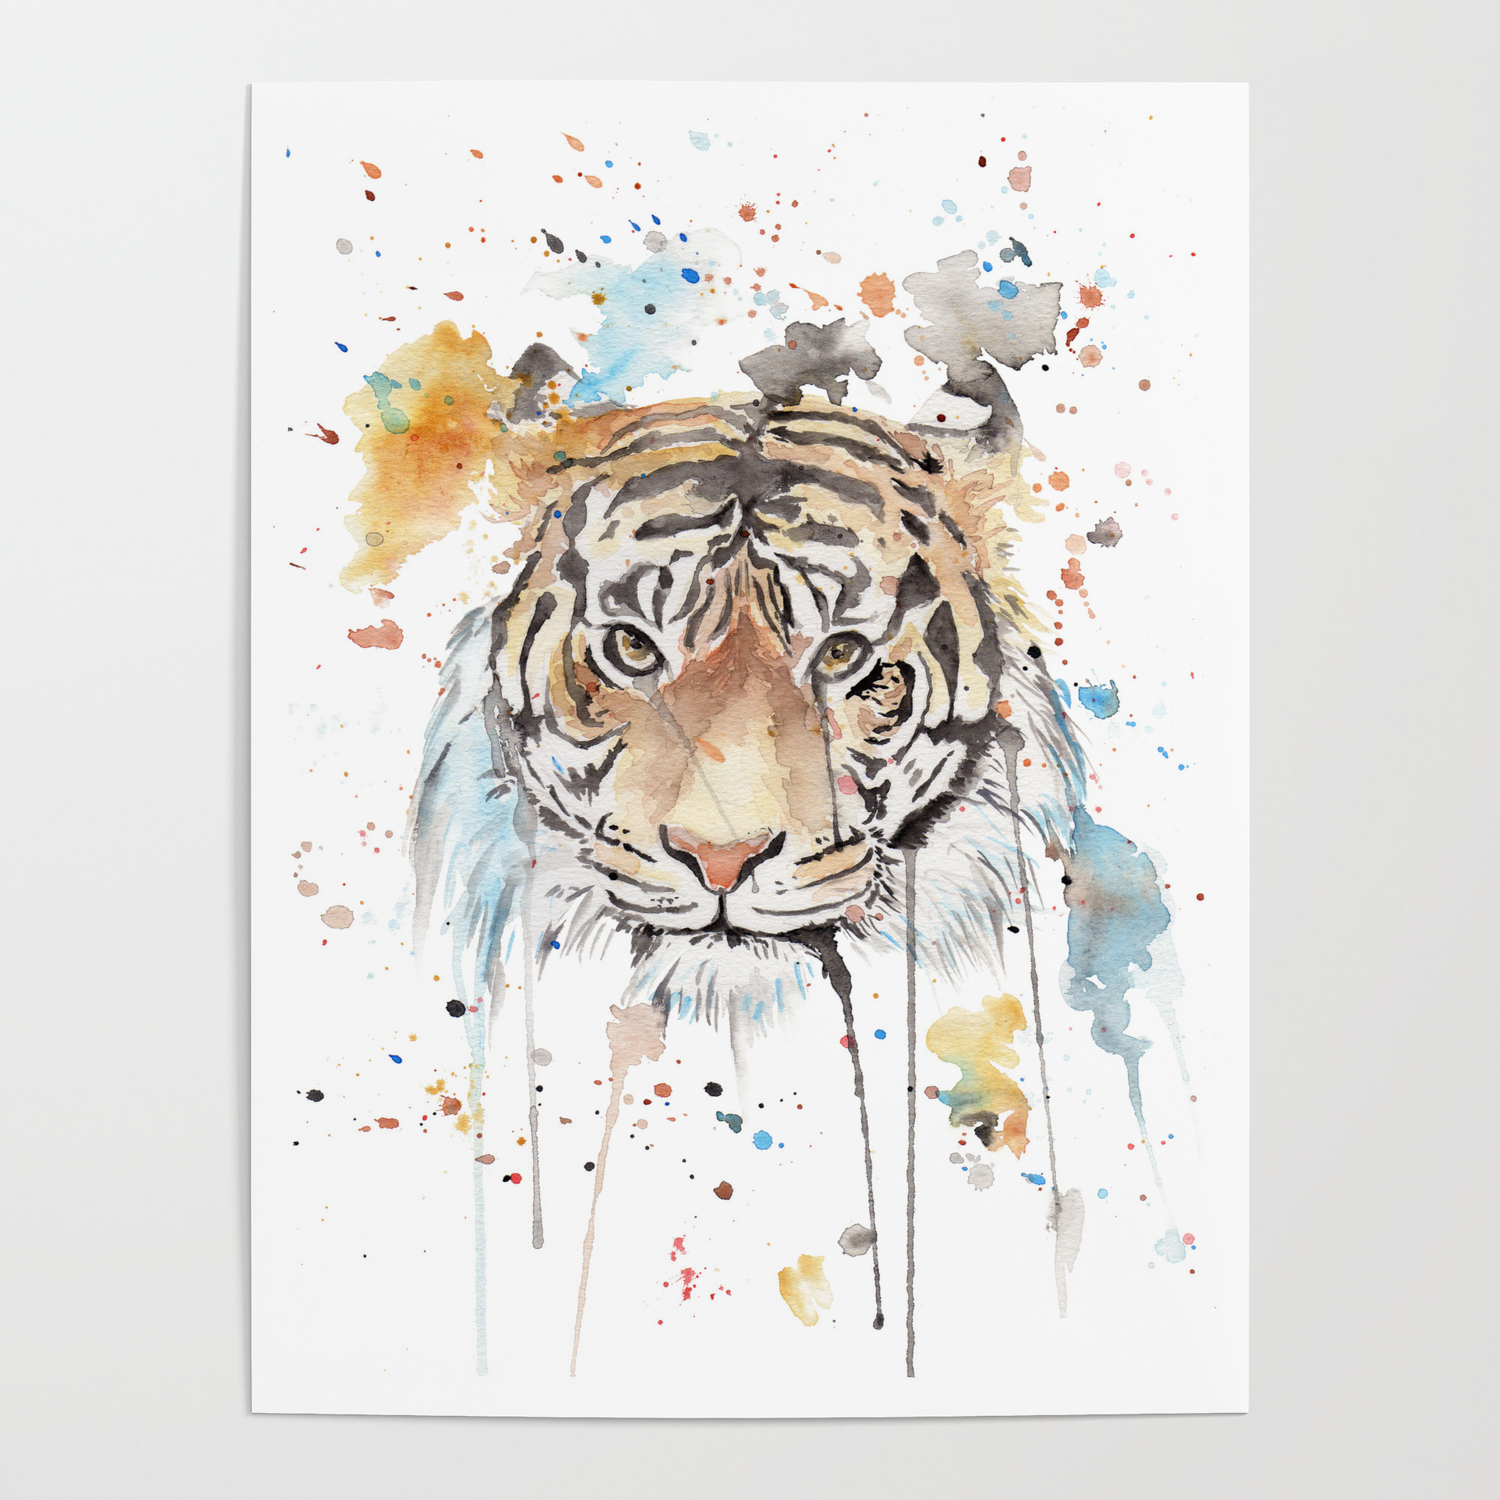 Animal Poster TIGER CLOSE UP Picture Poster Print Art A0 A1 A2 A3 A4 3471 